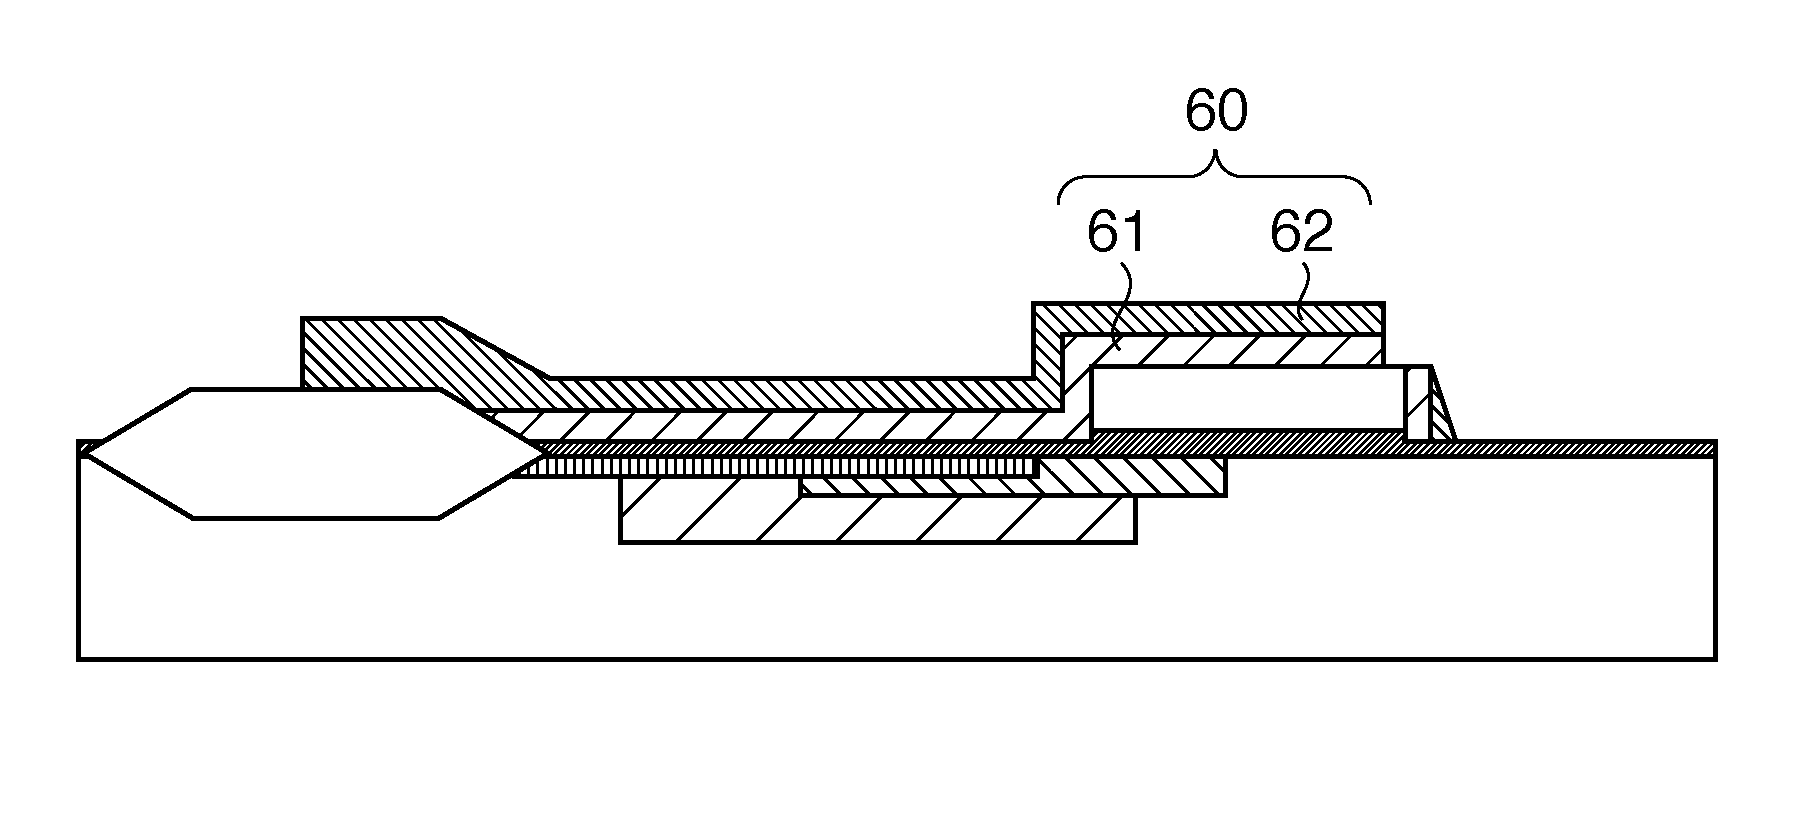 Manufacturing method for a solid-state image sensor